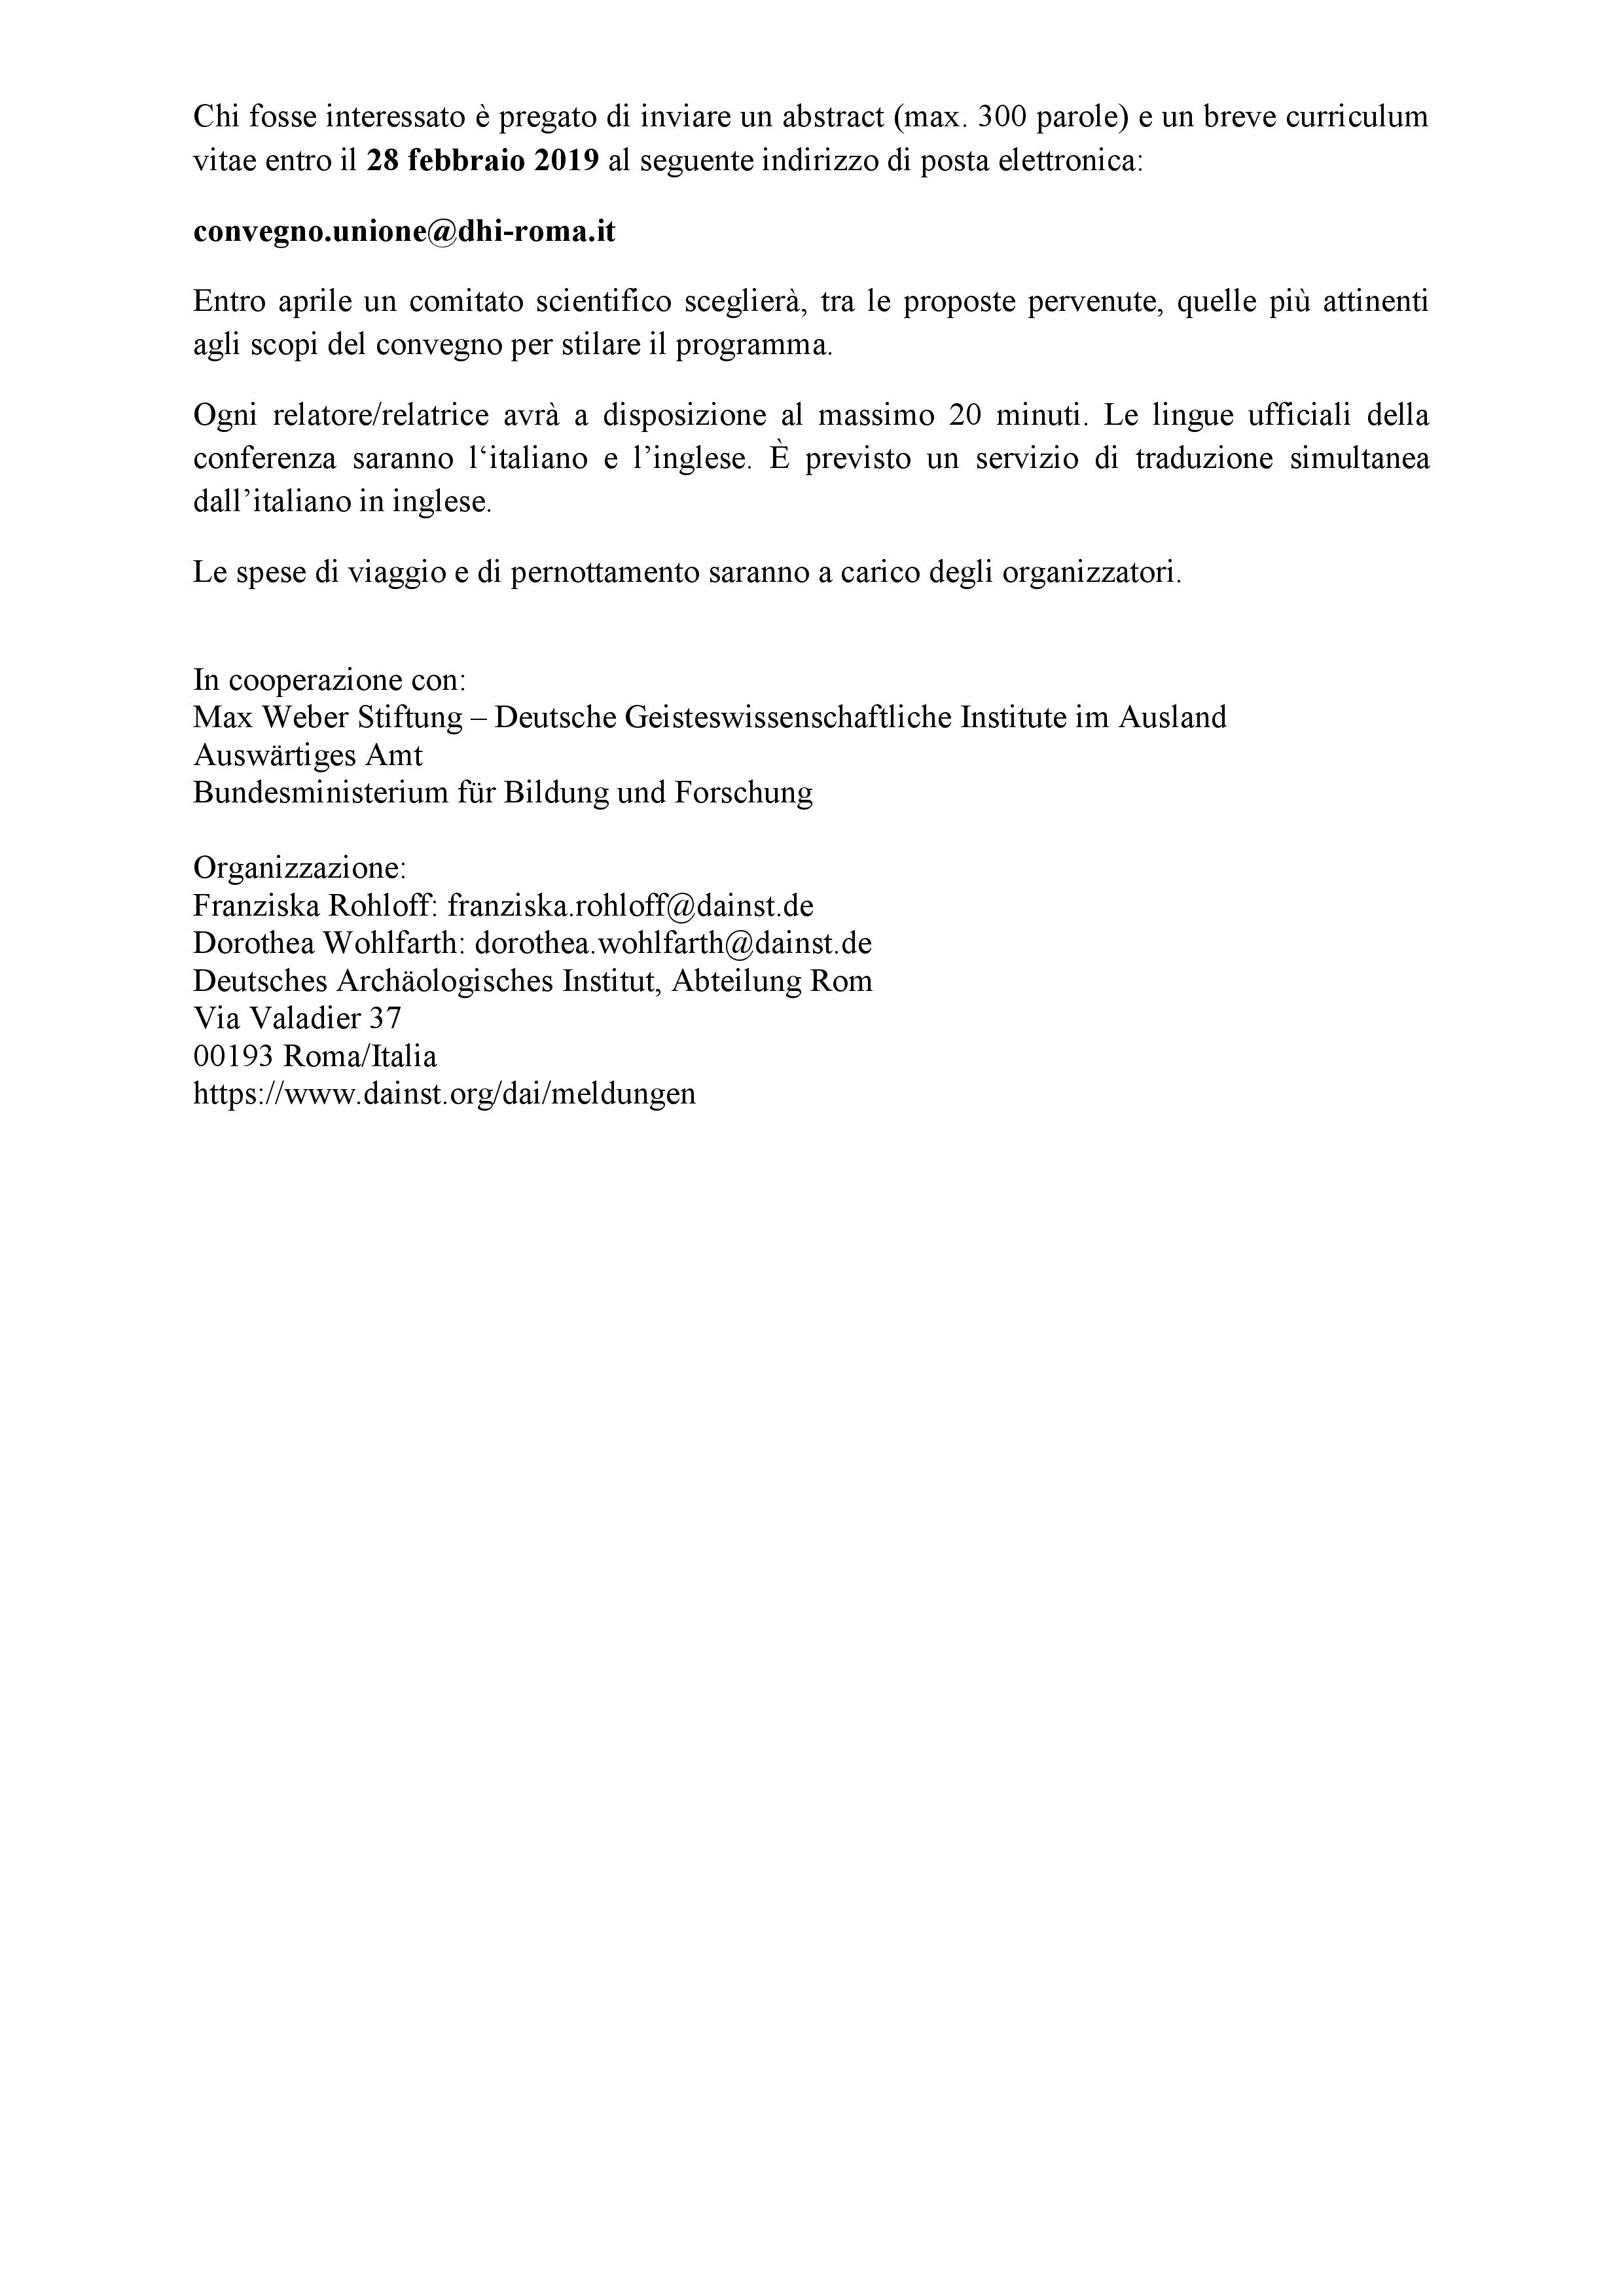 Call_for_Papers_Model_Rome_Italienisch_letzte_Version-page-002